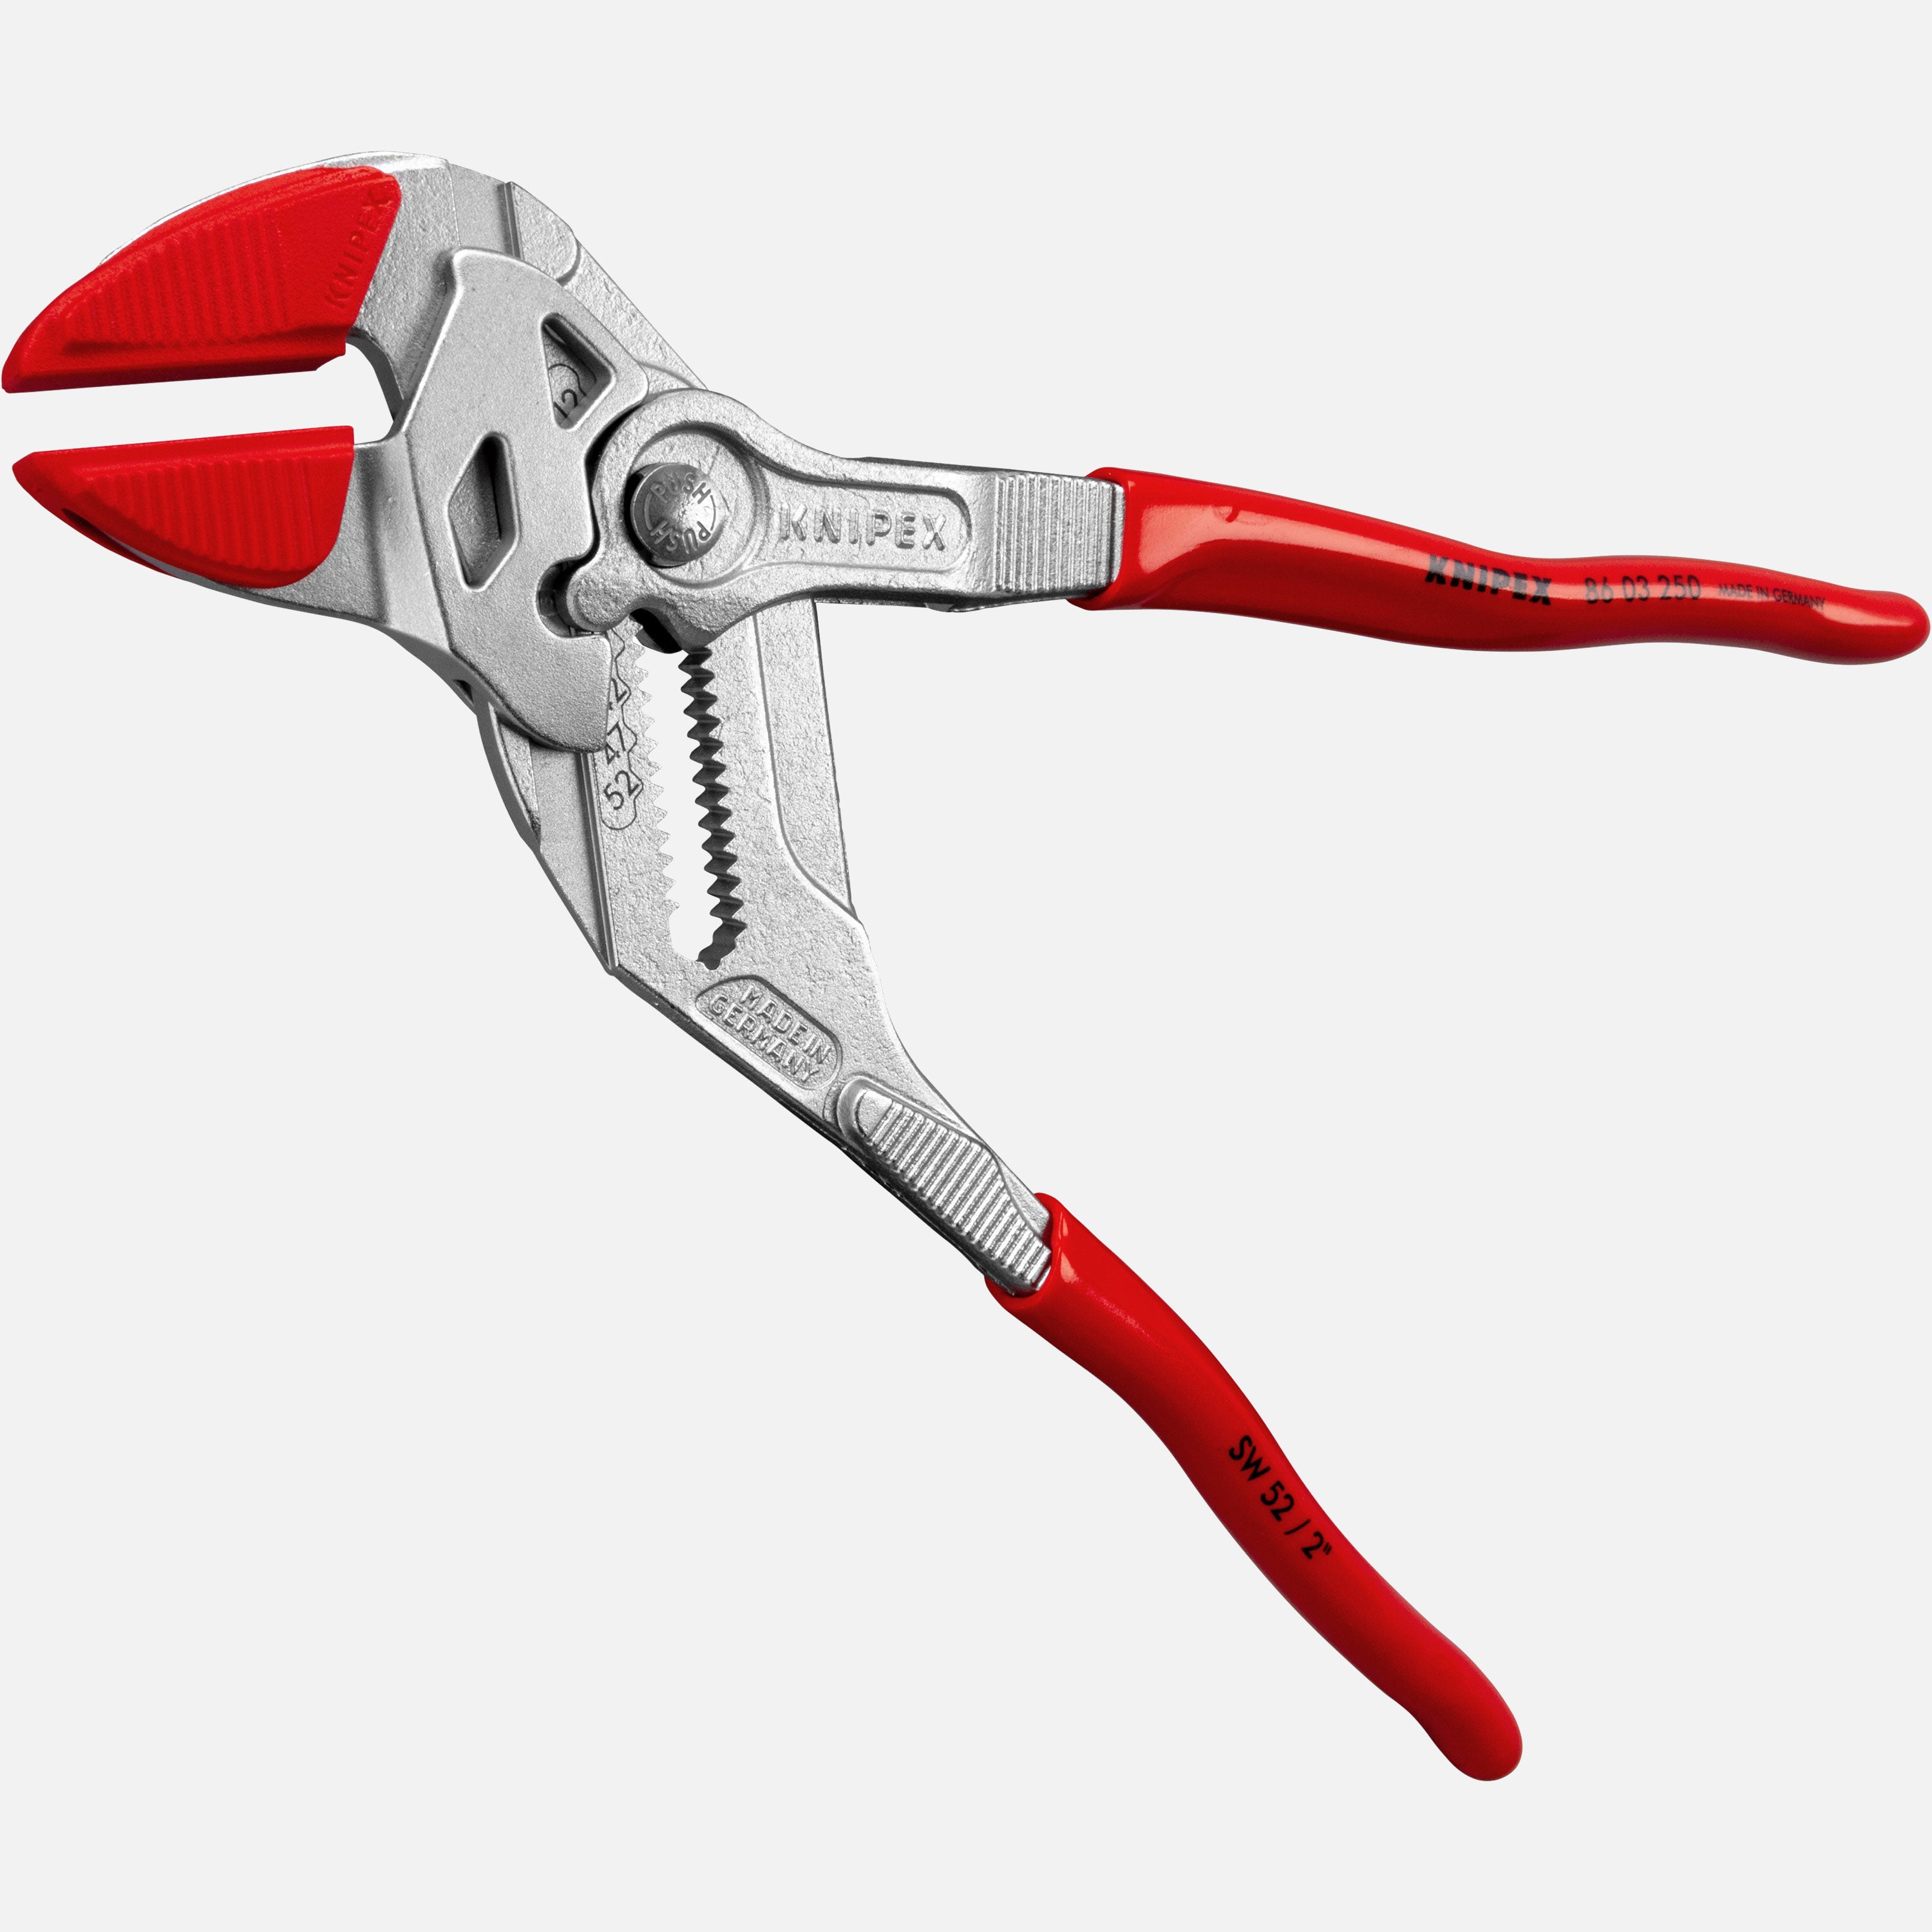 Malco Eagle Grip Locking Pliers : Malco Products, SBC : Free Download,  Borrow, and Streaming : Internet Archive